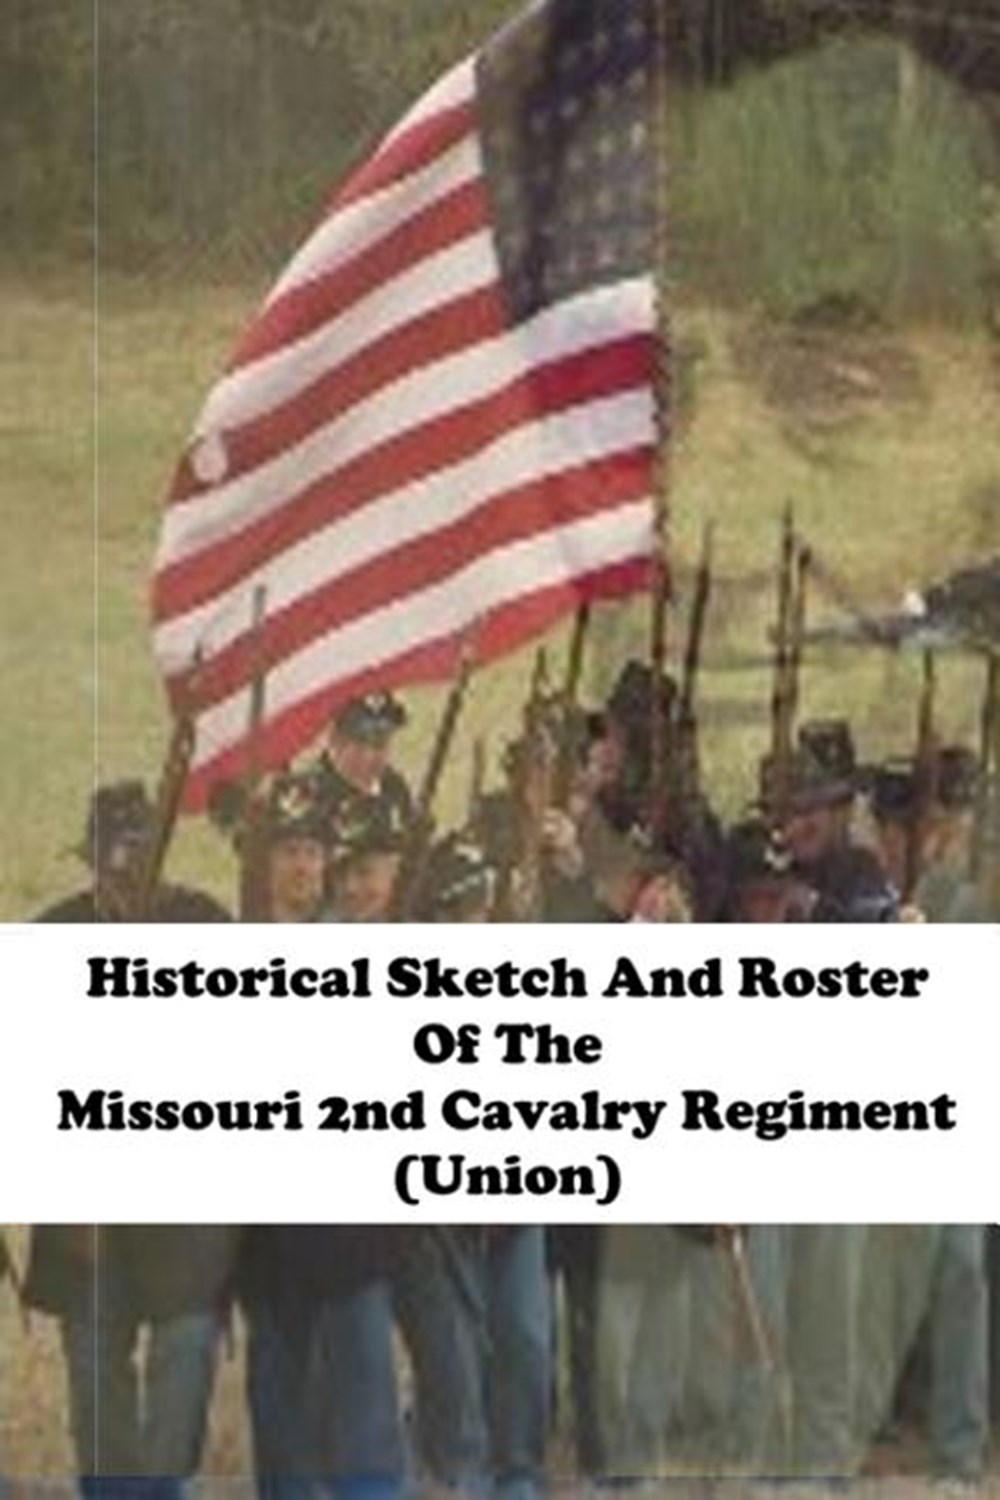 Historical Sketch and Roster of the Missouri 2nd Cavalry Regiment (Union)